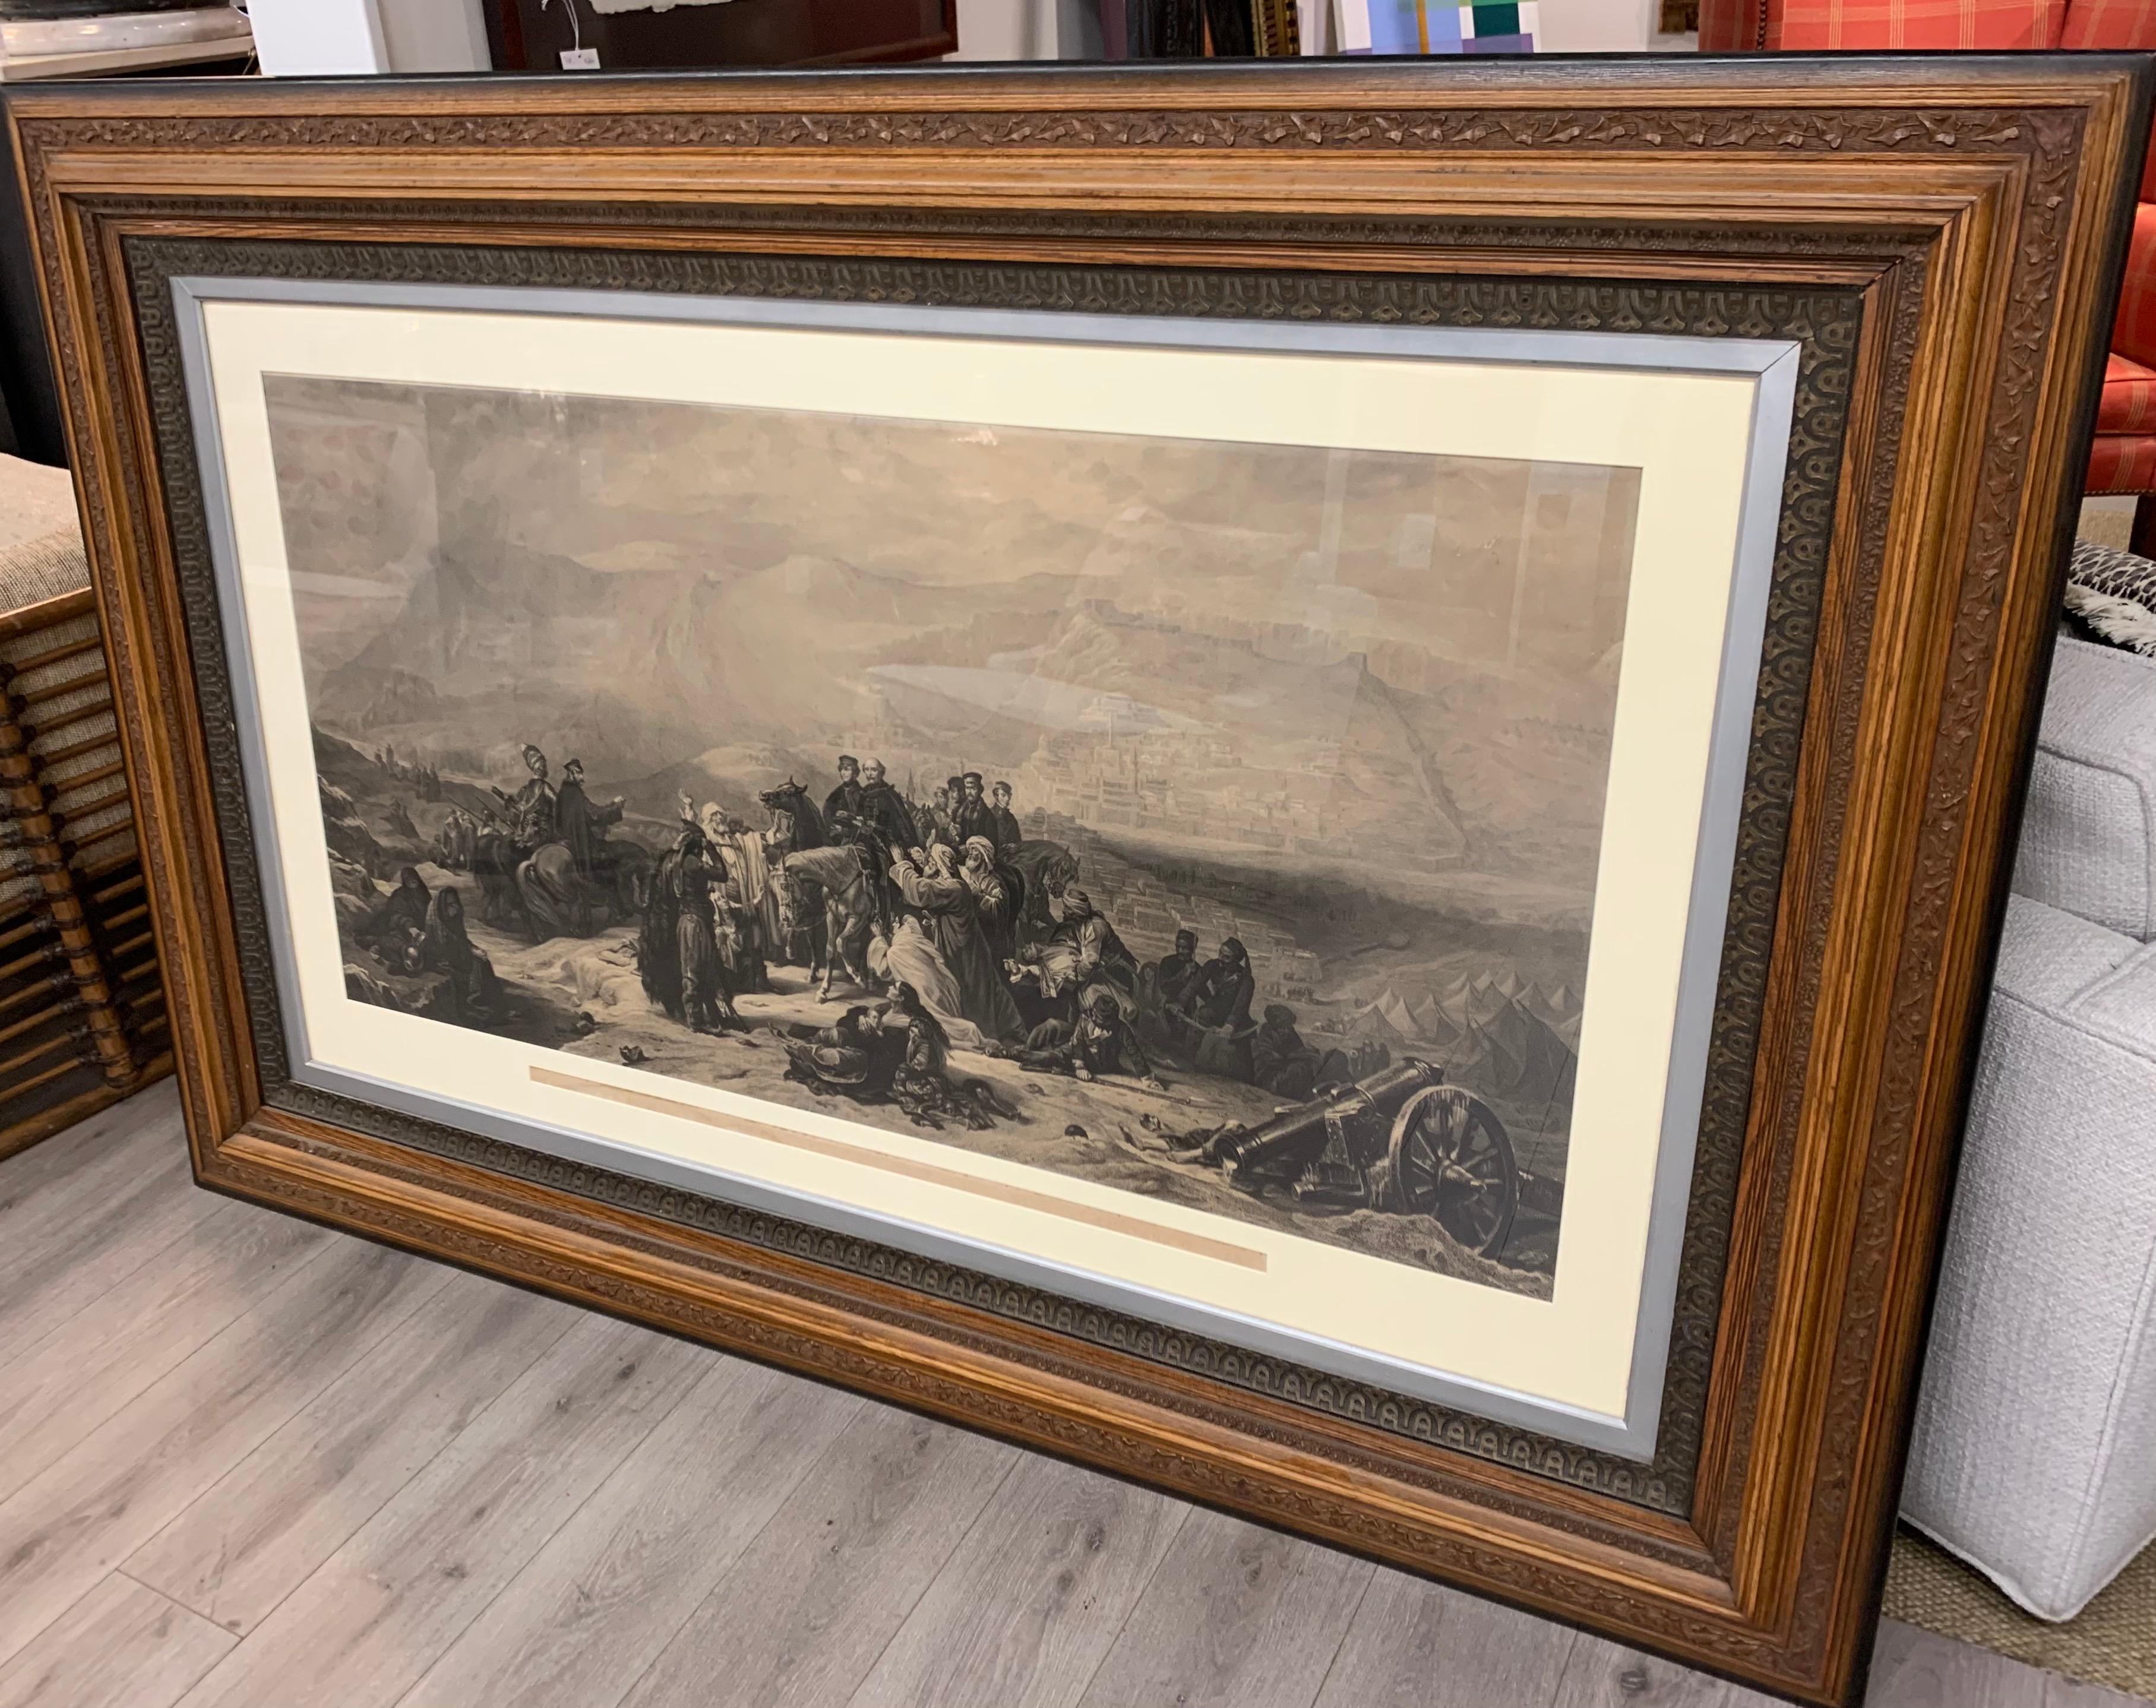 Almost six feet wide framed etching. The frame is heavy wood and there is a plastic cover to protect
etching. The piece of art is titles 